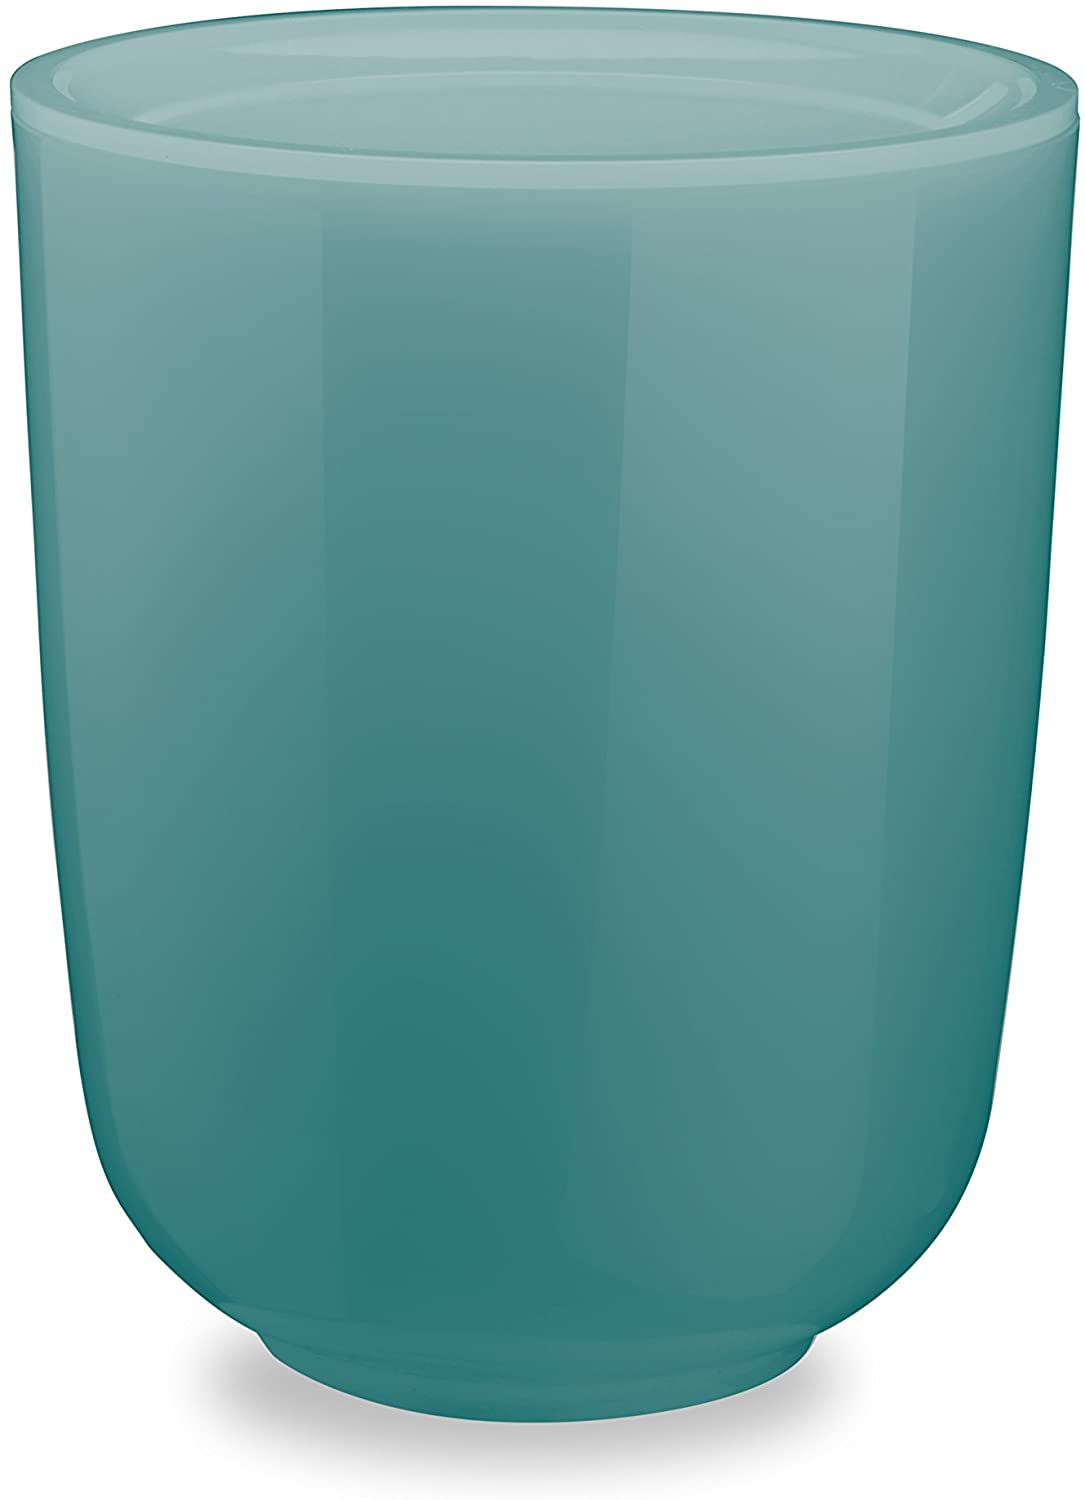 Umbra 023911 276 Droplet Badmülleimer and Pedal Bin with Lid, Turquoise Blu